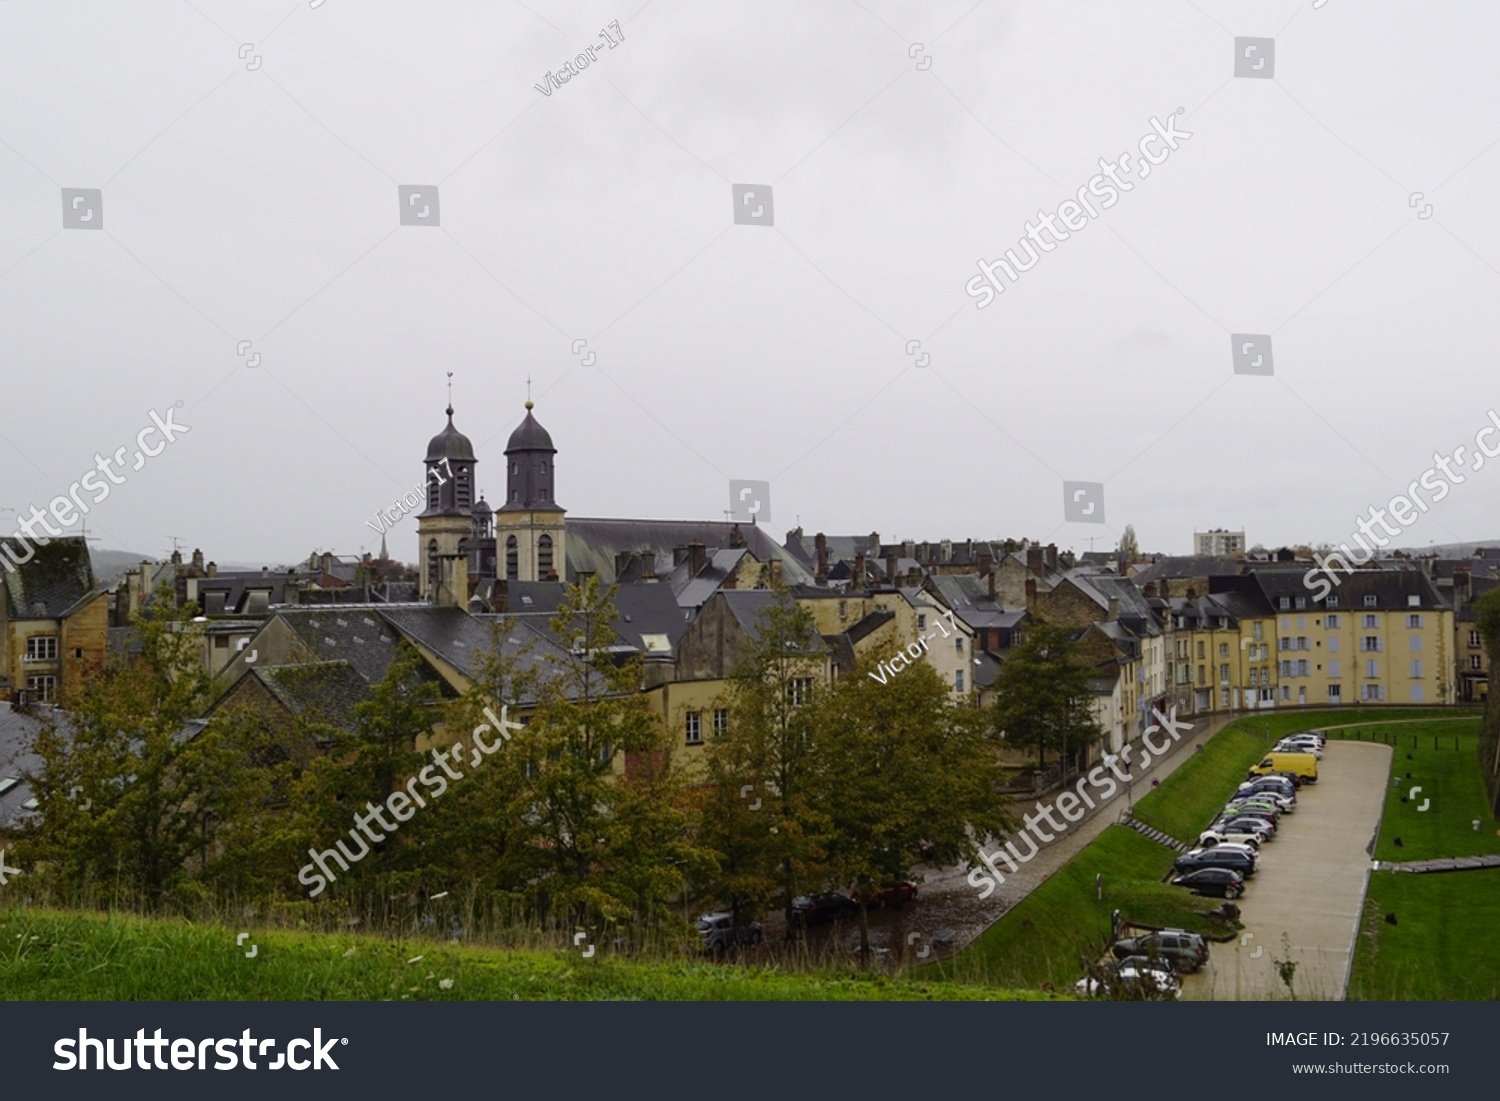 The view of streets in the French city of Sedan from the wall of the castle of Sedan which is located in the middle of the city, on a rainy autumn day. #2196635057